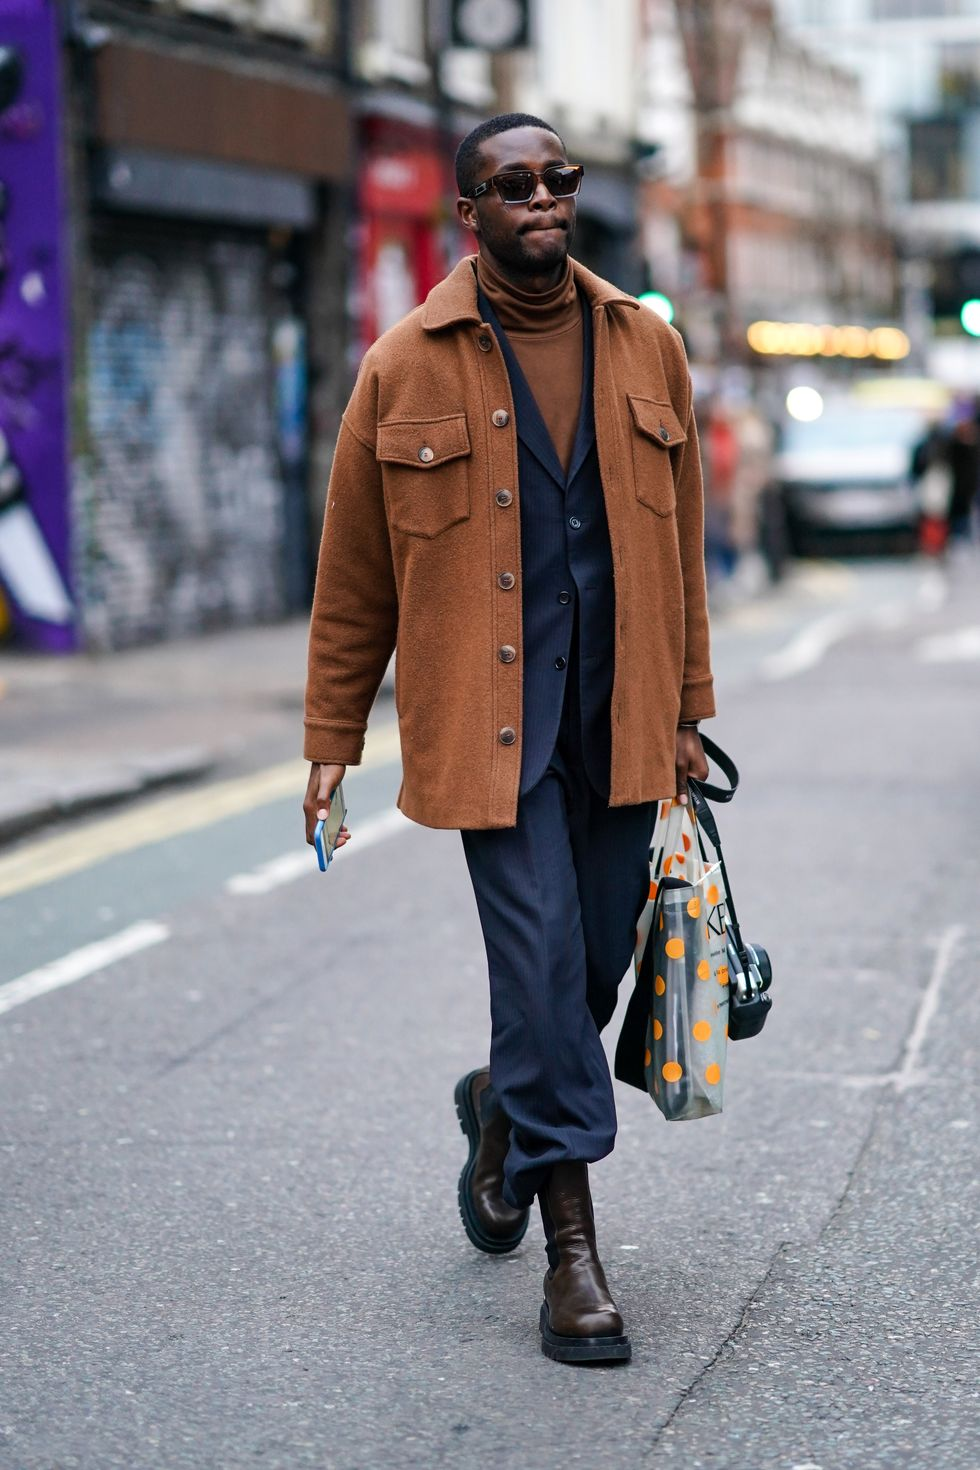 The Best (And Maddest) Street Style At London Fashion Week Men's - The Best (And Maddest) Street Style At London Fashion Week Men's -   17 style Street mens ideas